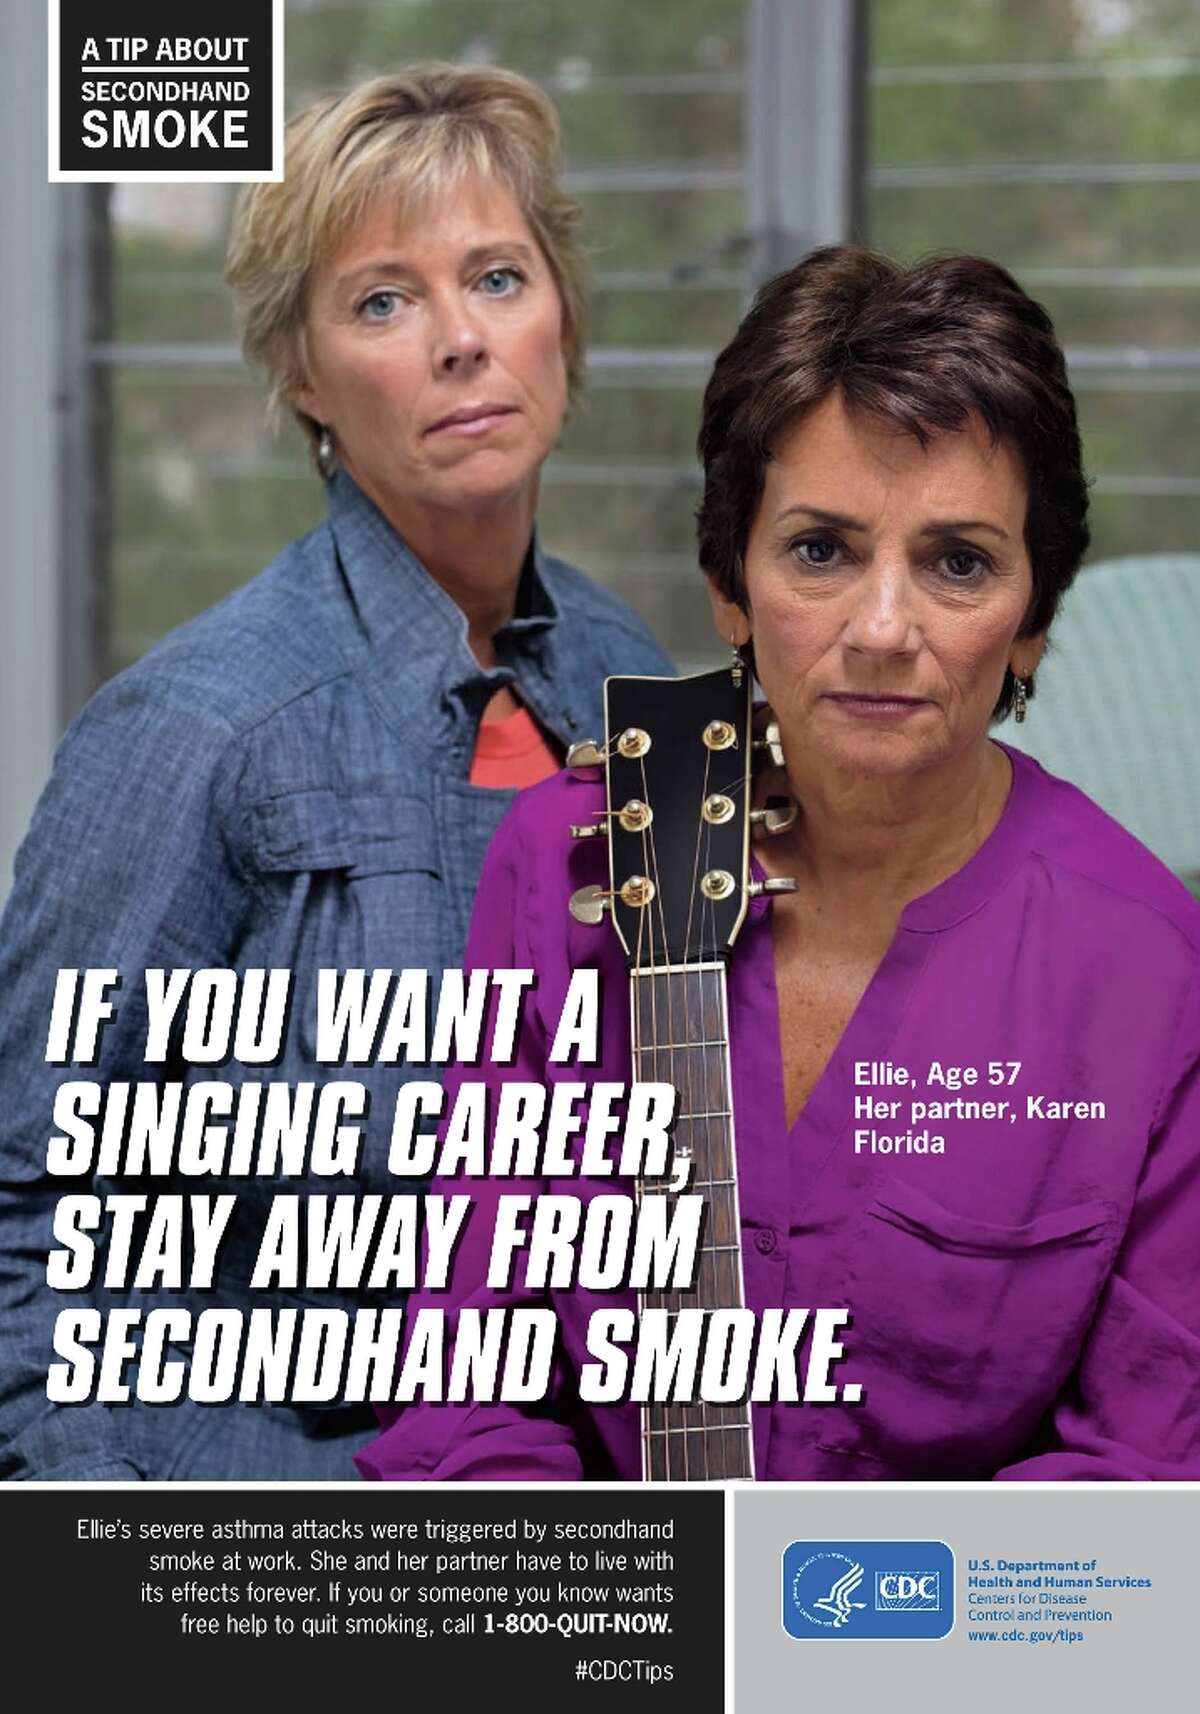 A Tip About Secondhand Smoke